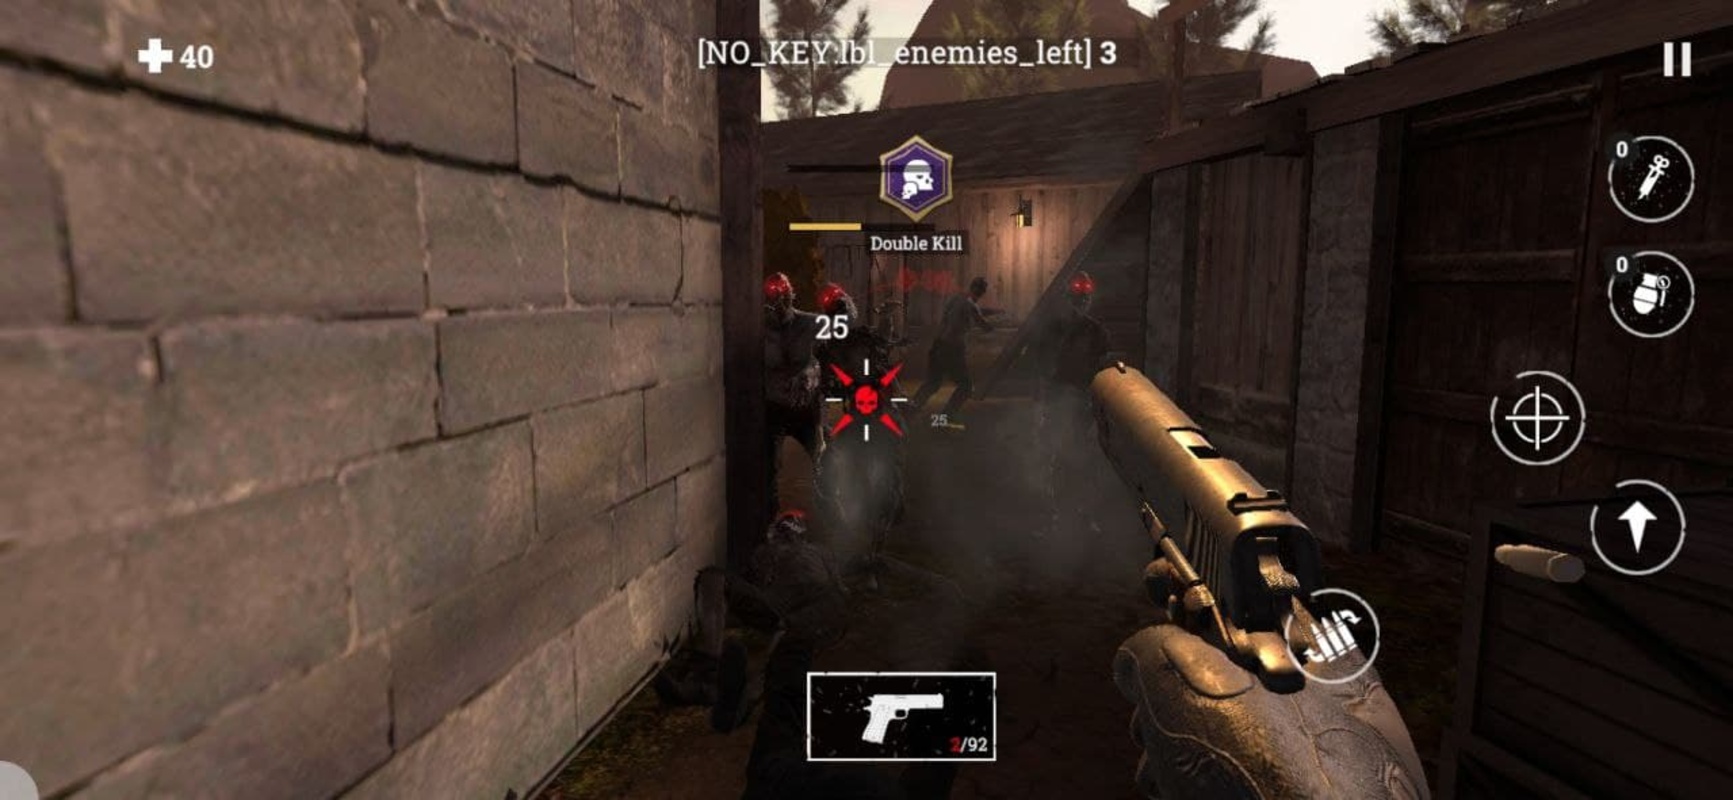 Crossfire: Survival Zombie Shooter 1.0.8 APK for Android Screenshot 9